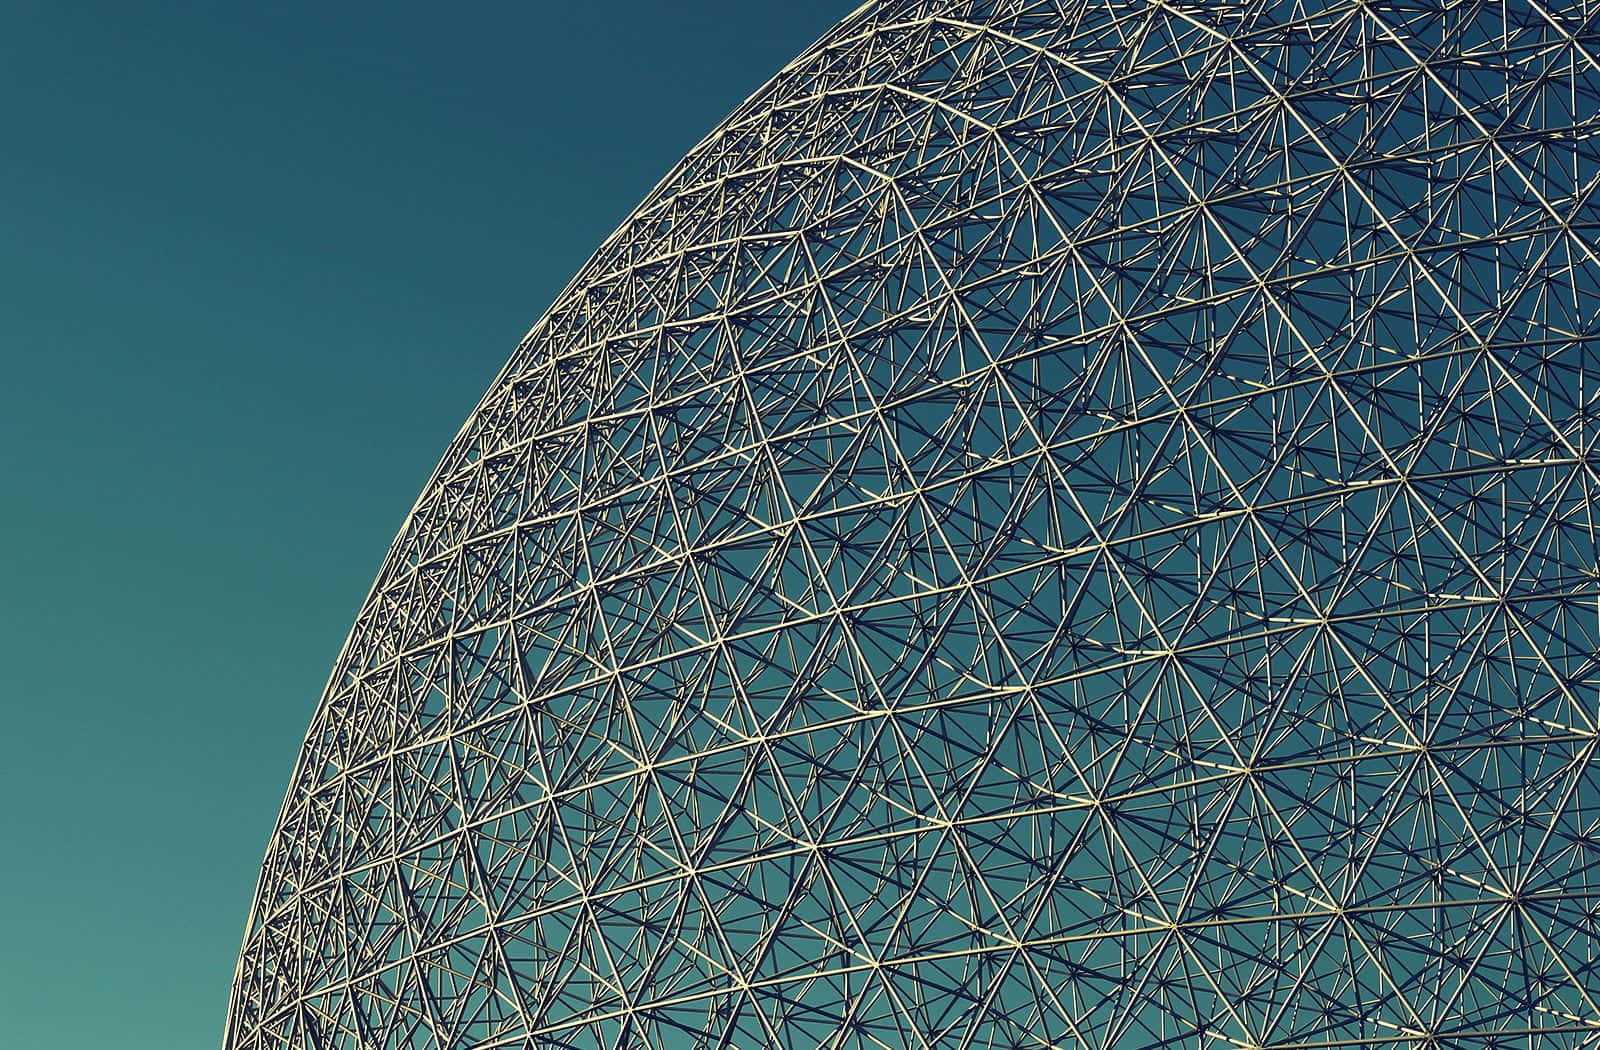 A Large Dome With A Metal Structure